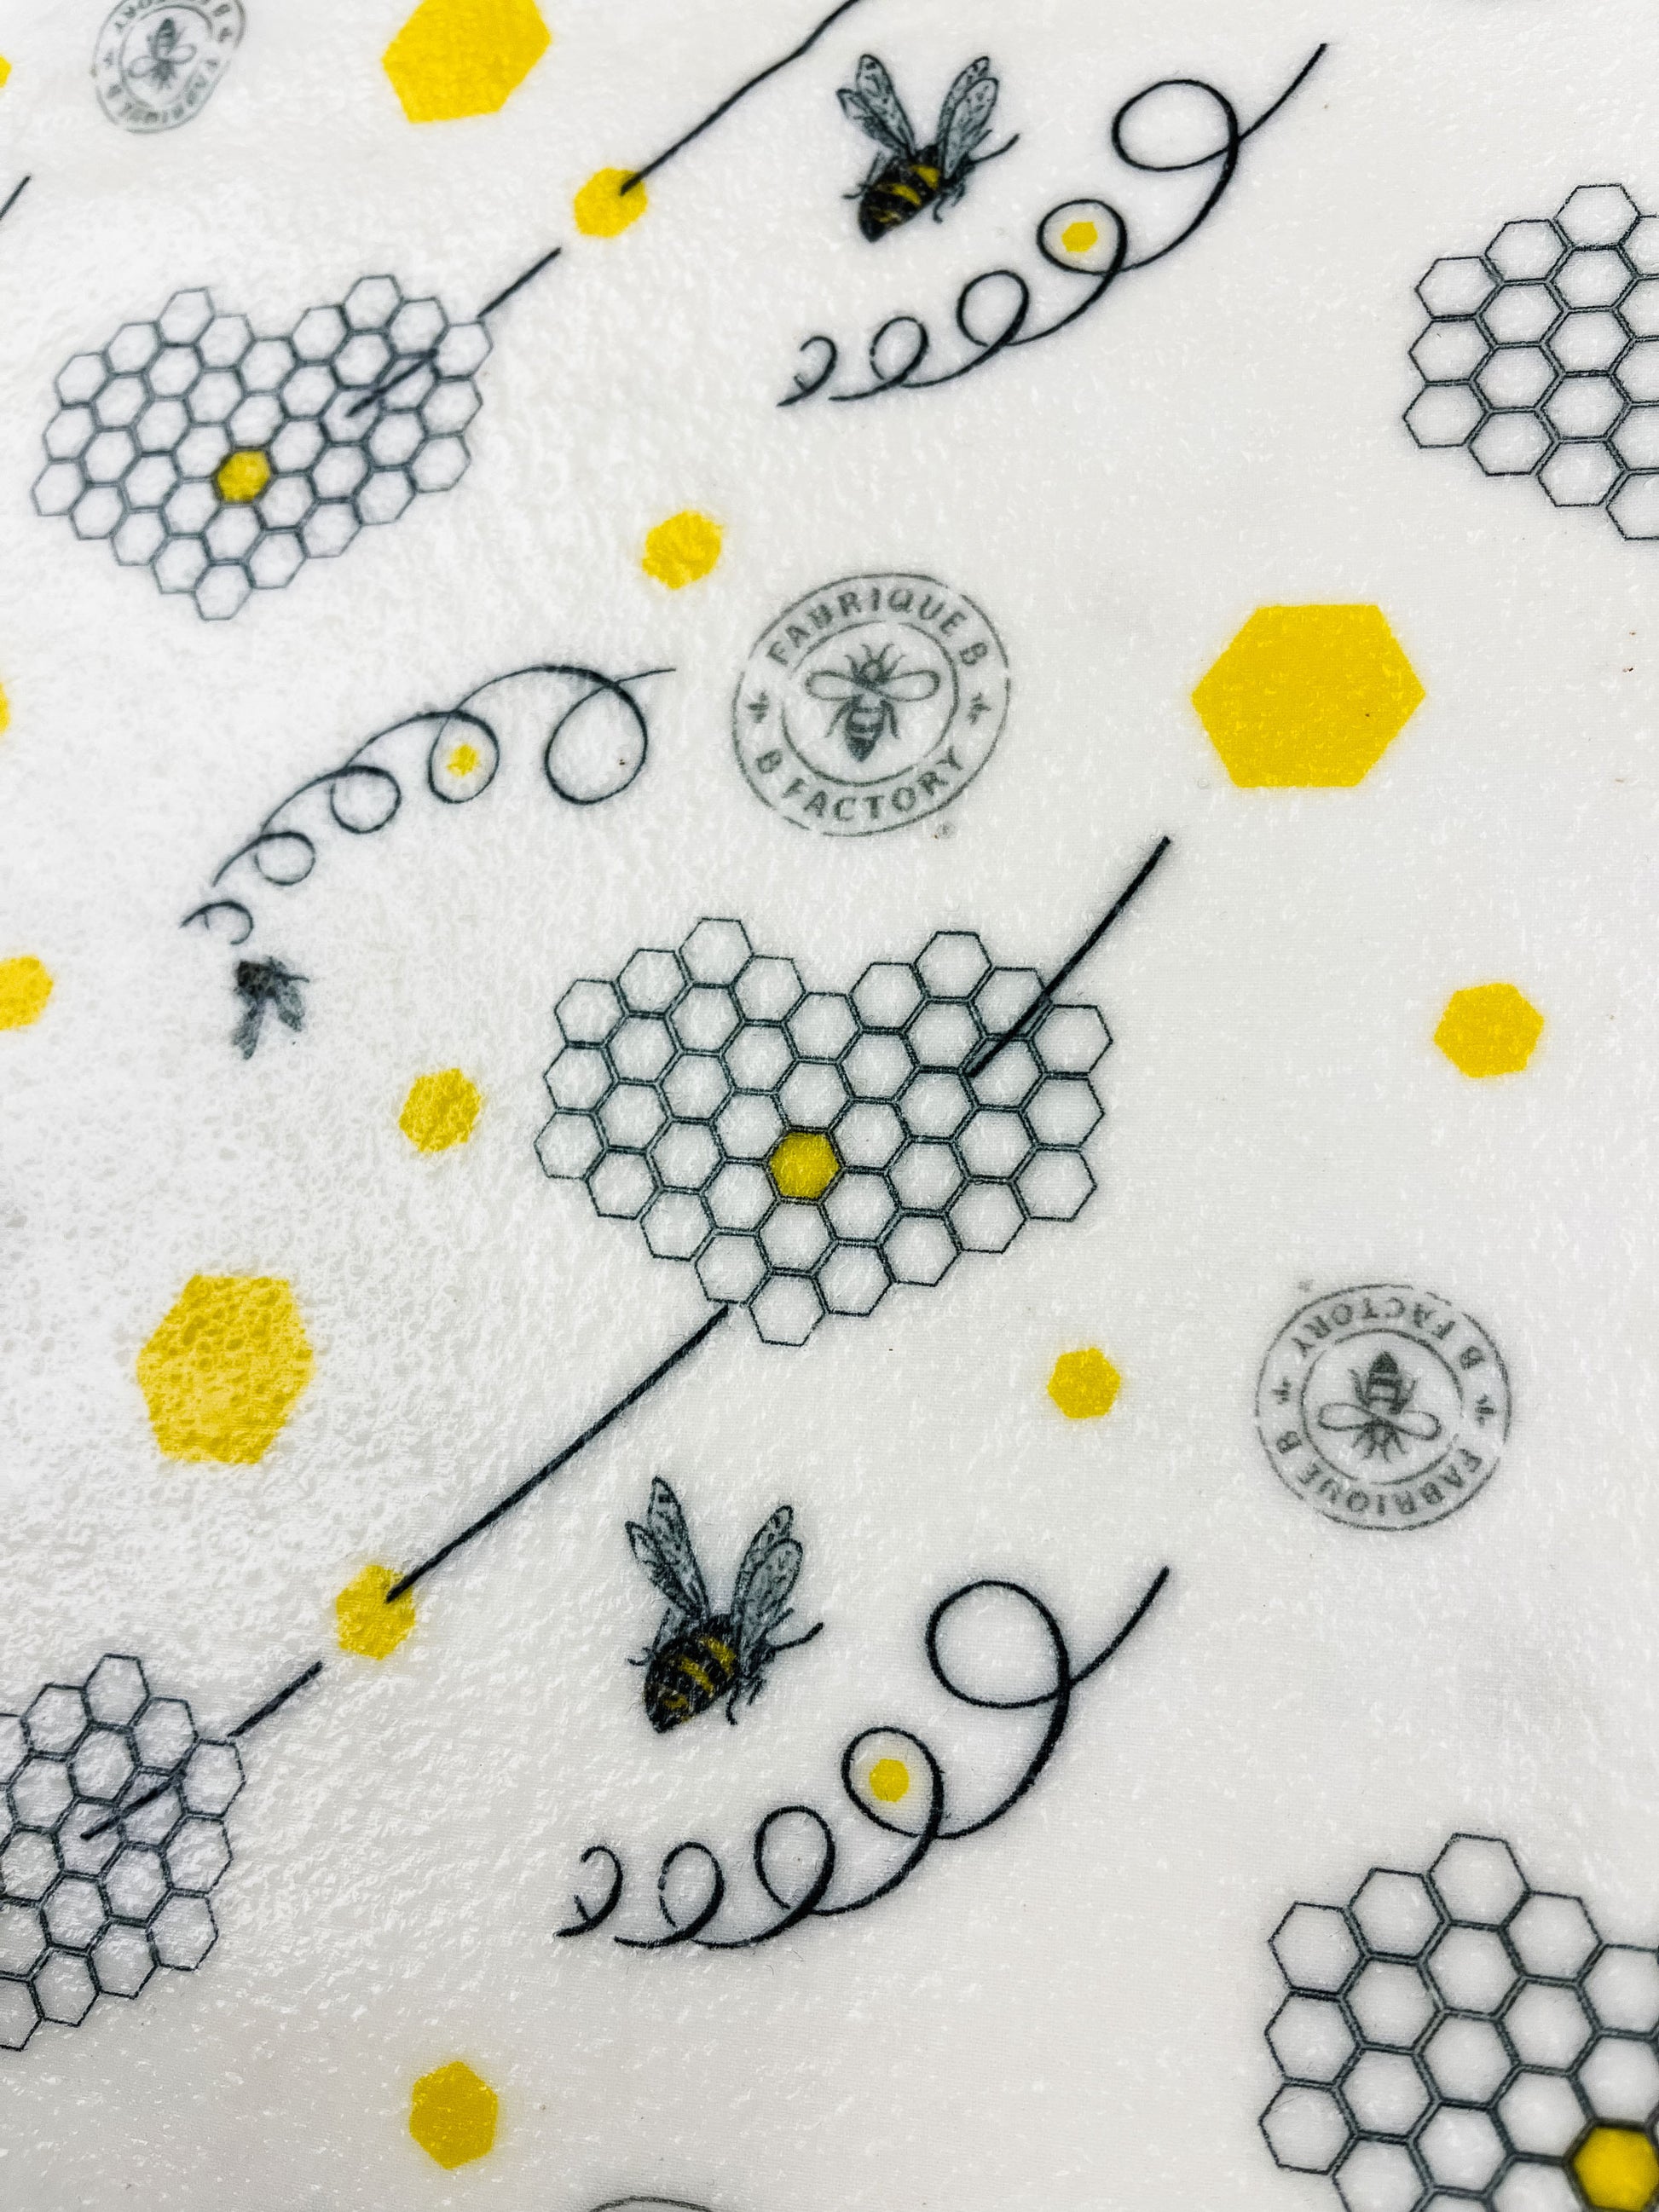 Close up of eco-friendly beeswax wrap with honeycombs, bees, and B Factory logo